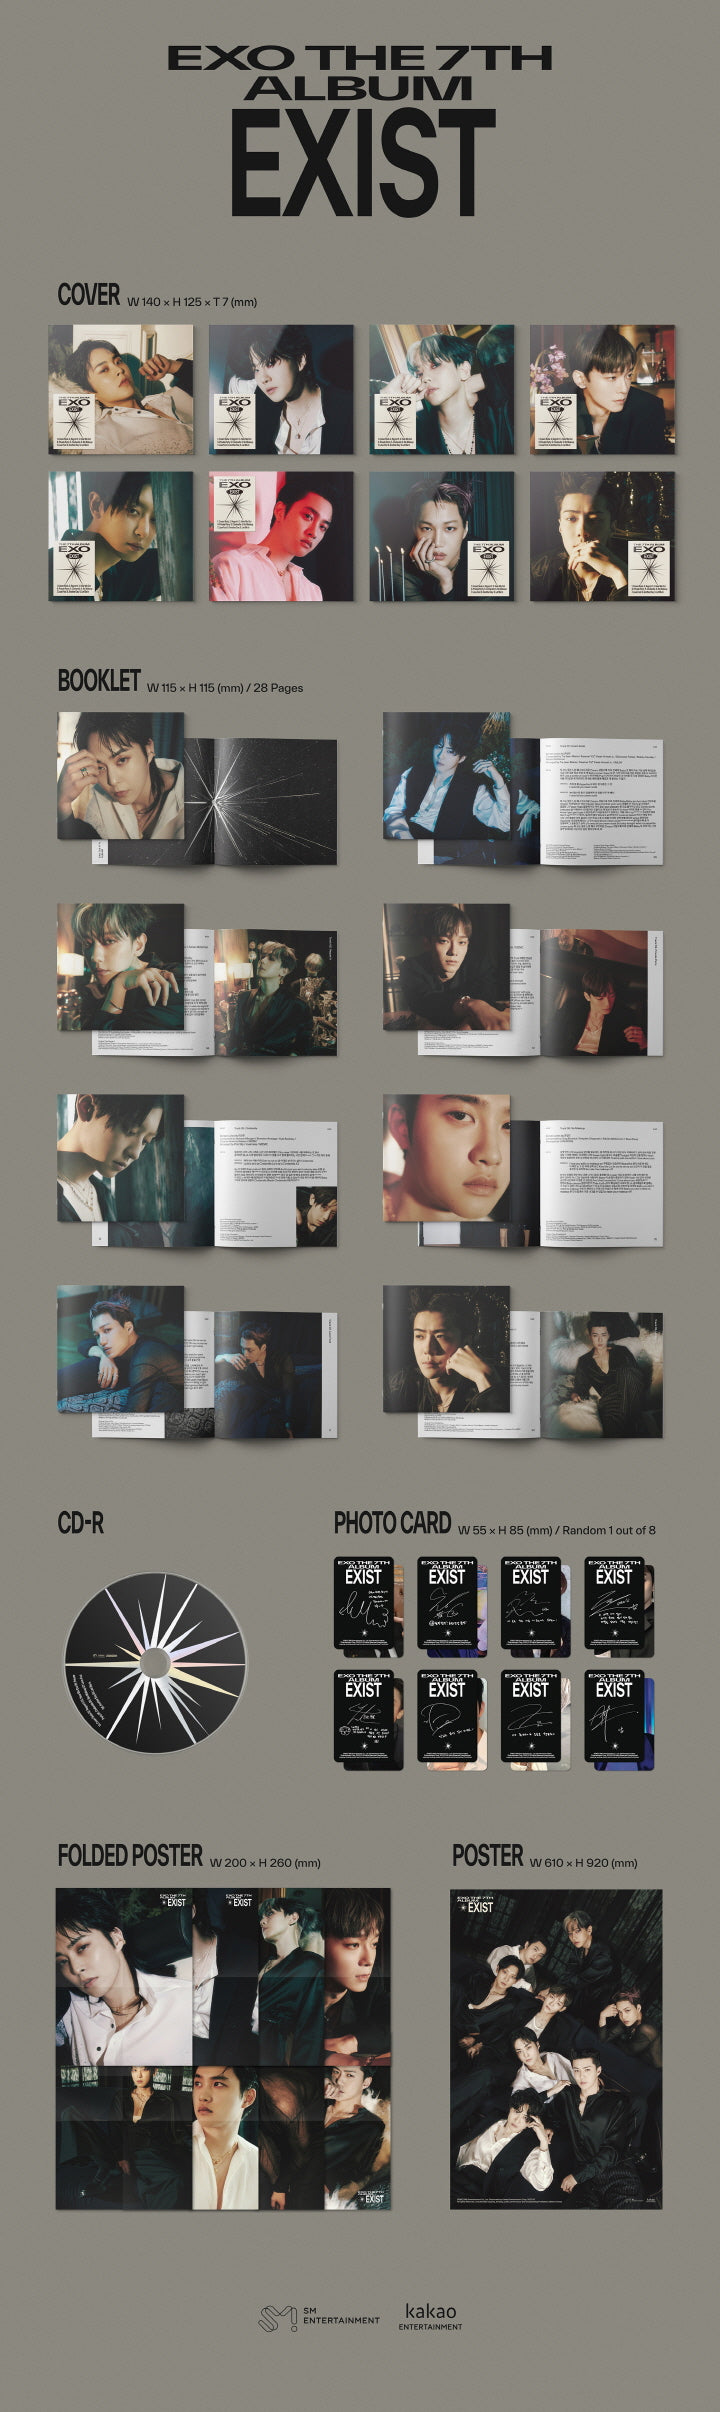 1 CD
1 Booklet (28 pages)
1 Photo Card (random out of 8 types)
1 Folded Poster (random out of 8 types)